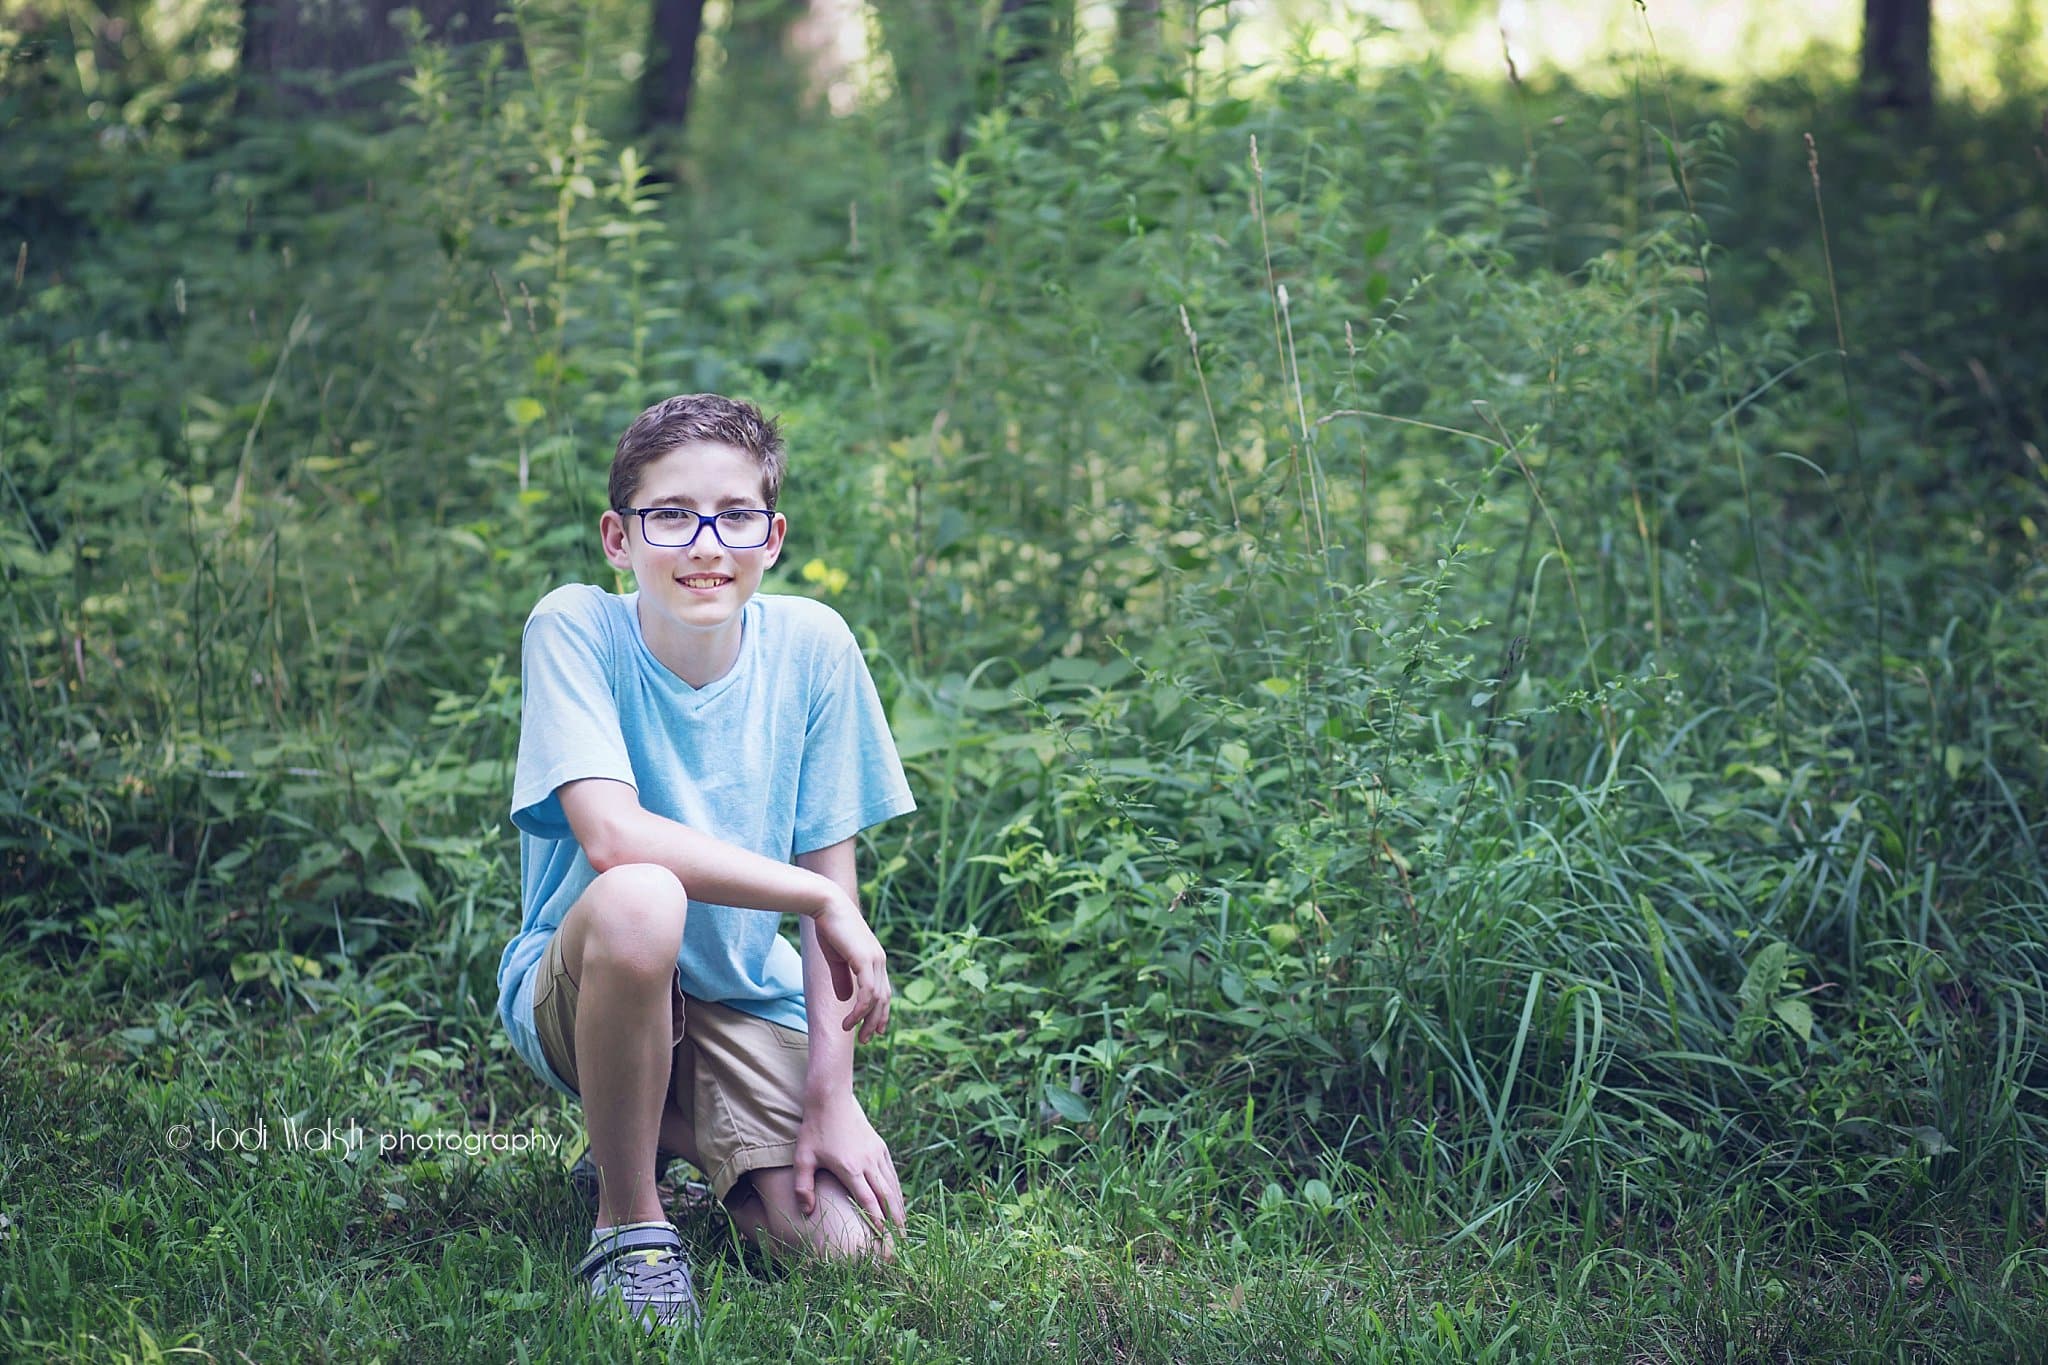 tween boy portrait in woods with blue shirt and blue framed glasses